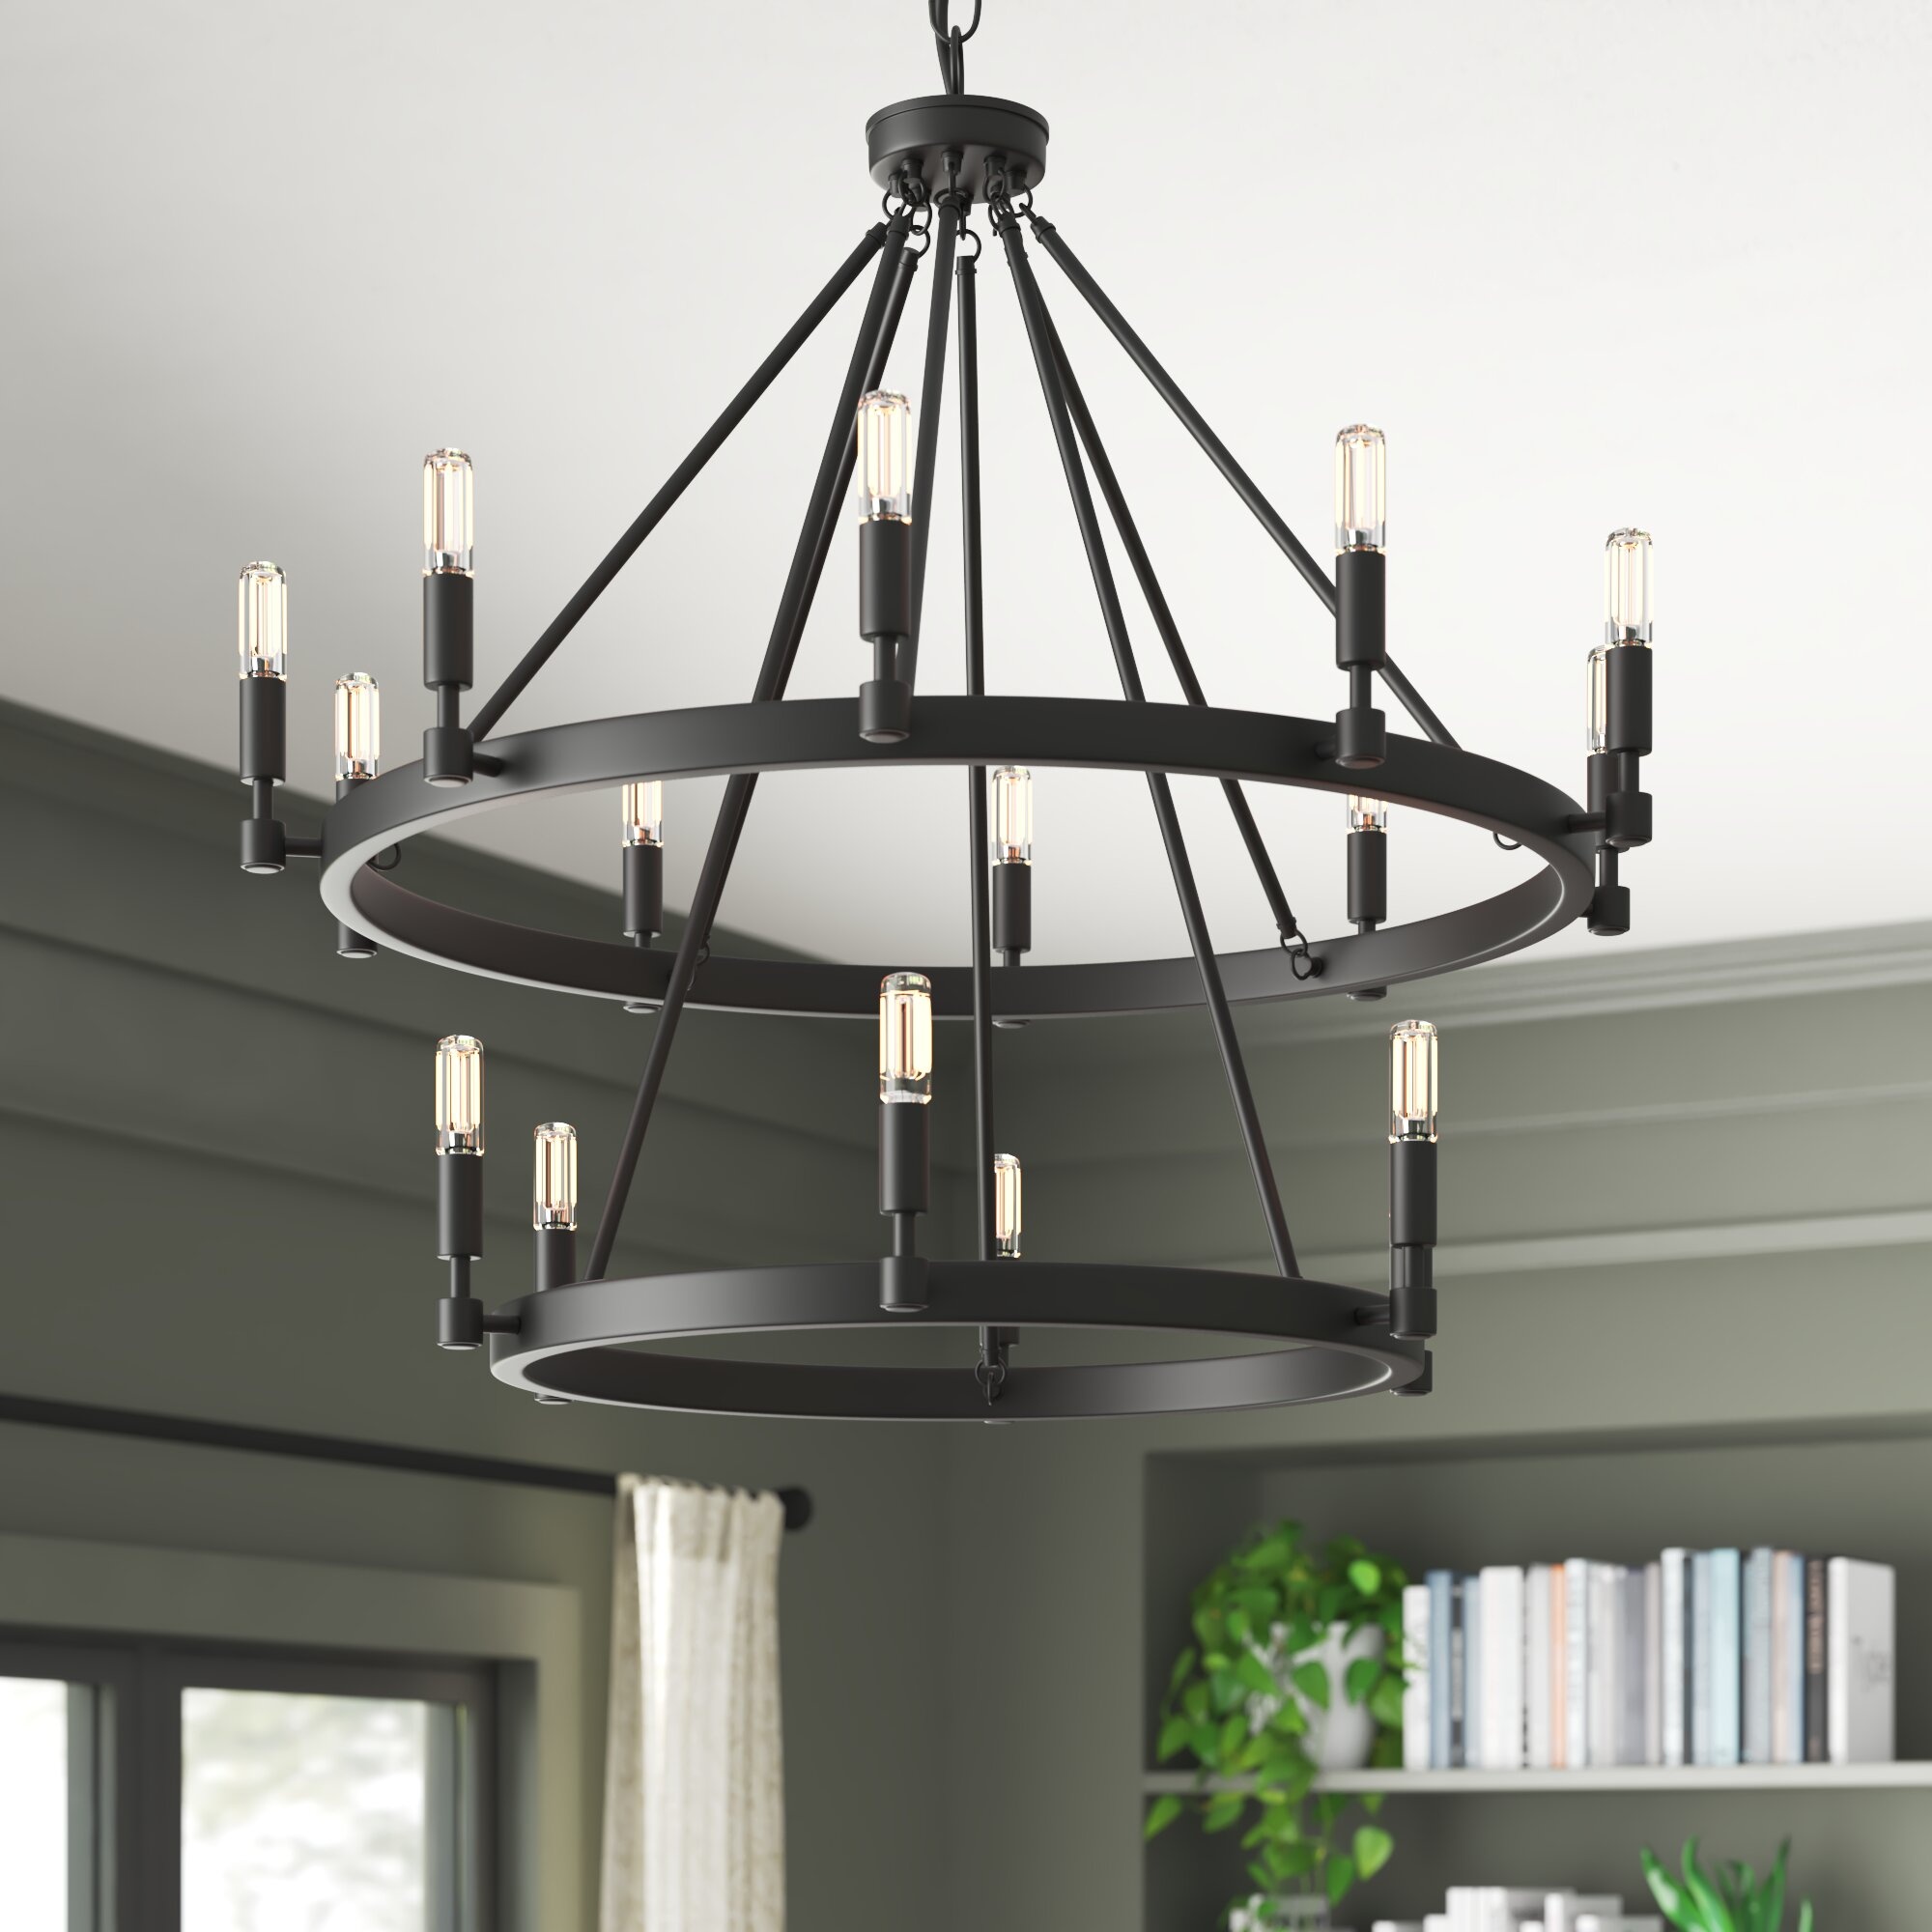 Camilla candle style chandelier, Wagon wheel design, Rustic charm, Eye-catching fixture, 2000x2000 HD Phone